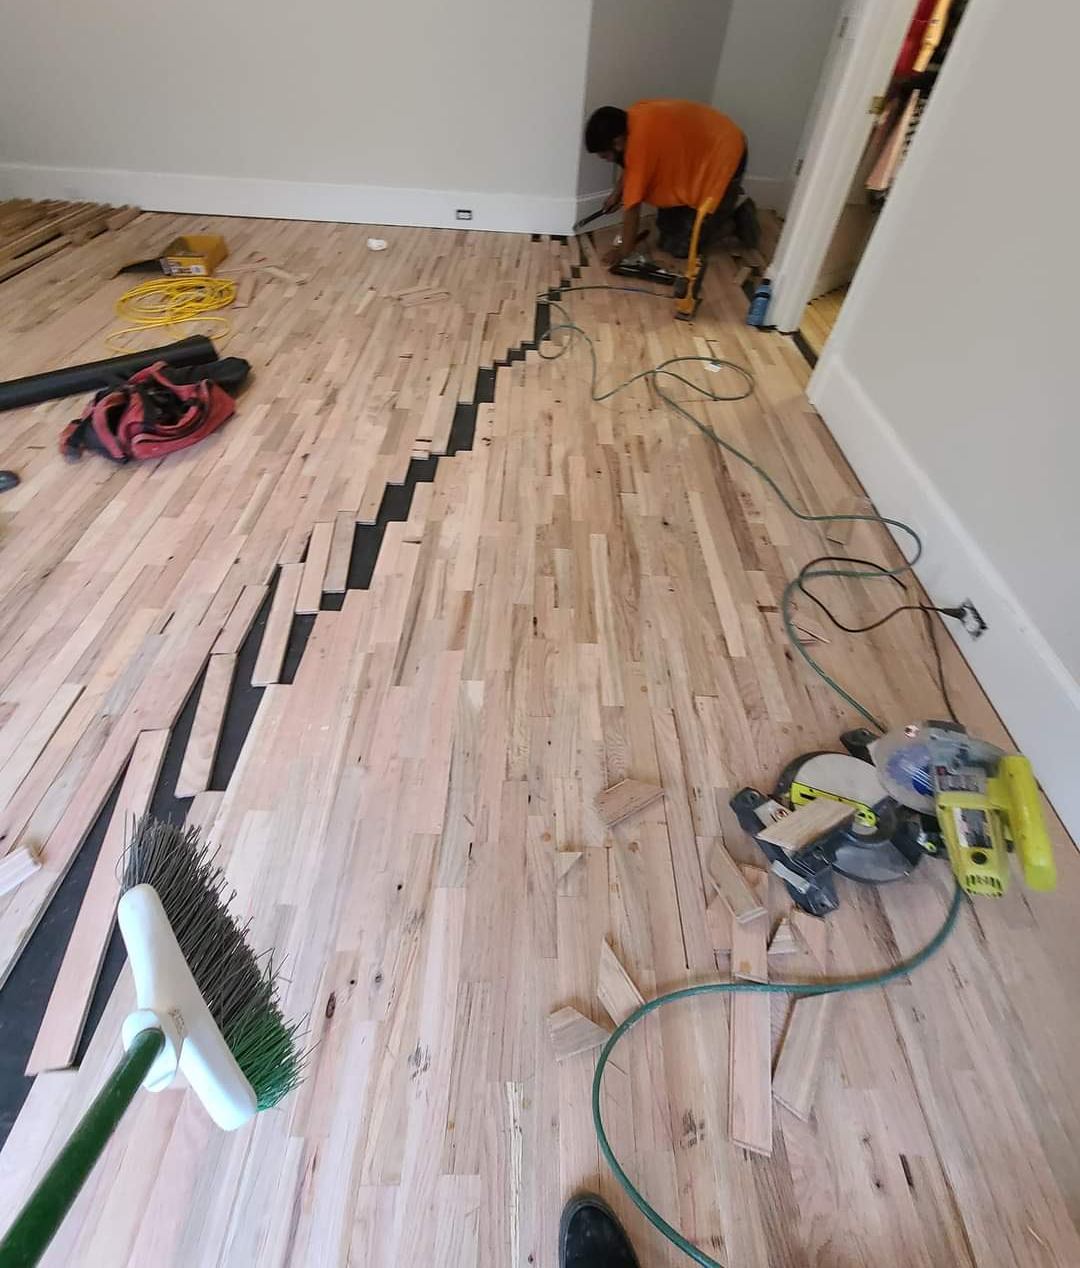 This hardwood floor installation is nearing completion.